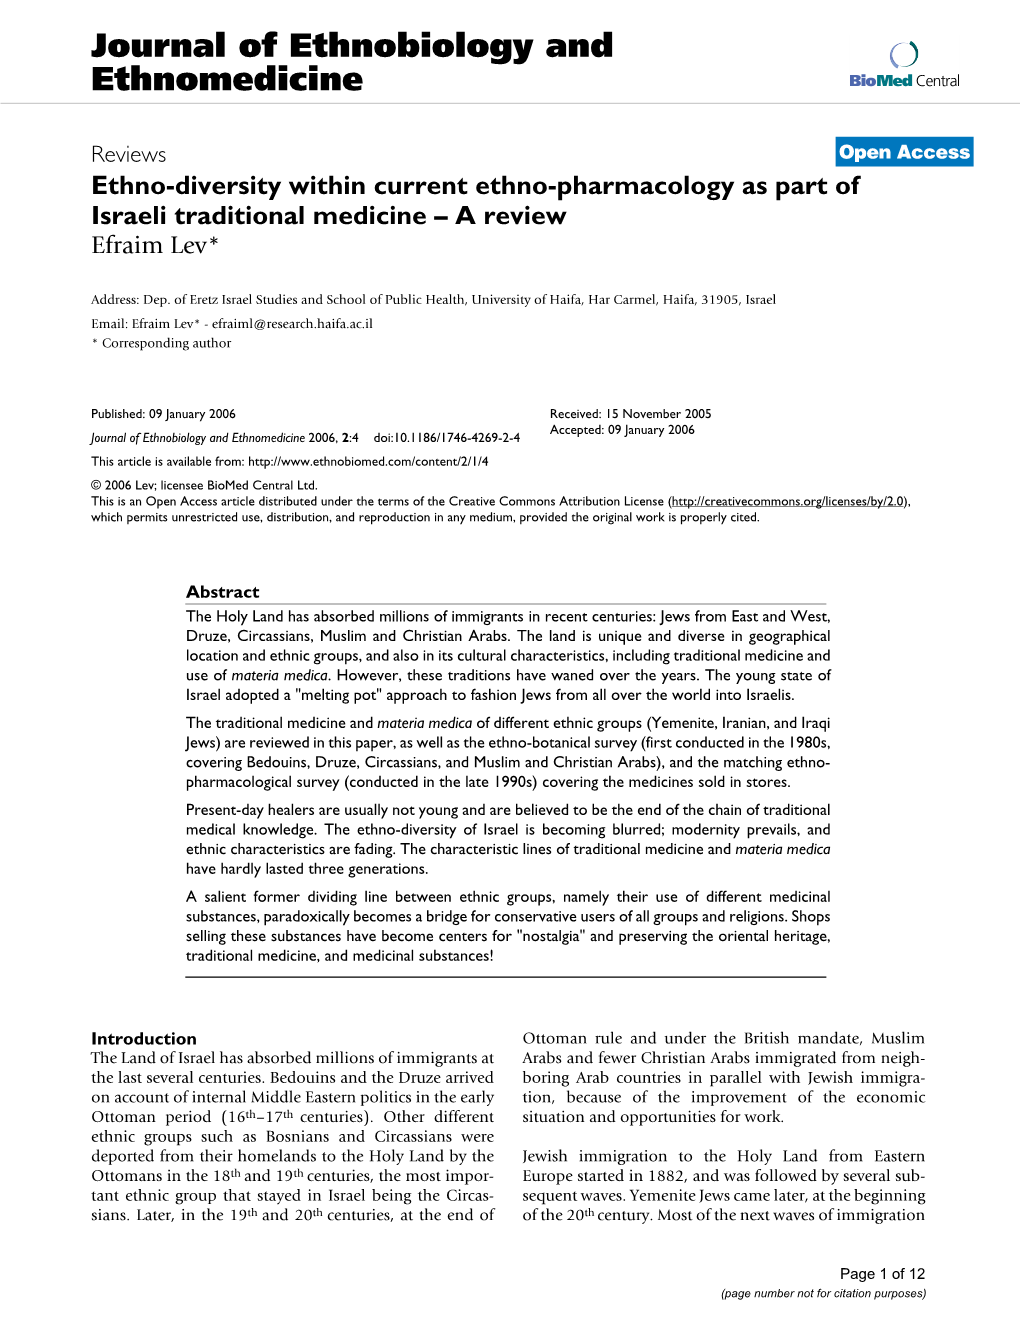 Ethno-Diversity Within Current Ethno-Pharmacology As Part of Israeli Traditional Medicine – a Review Efraim Lev*